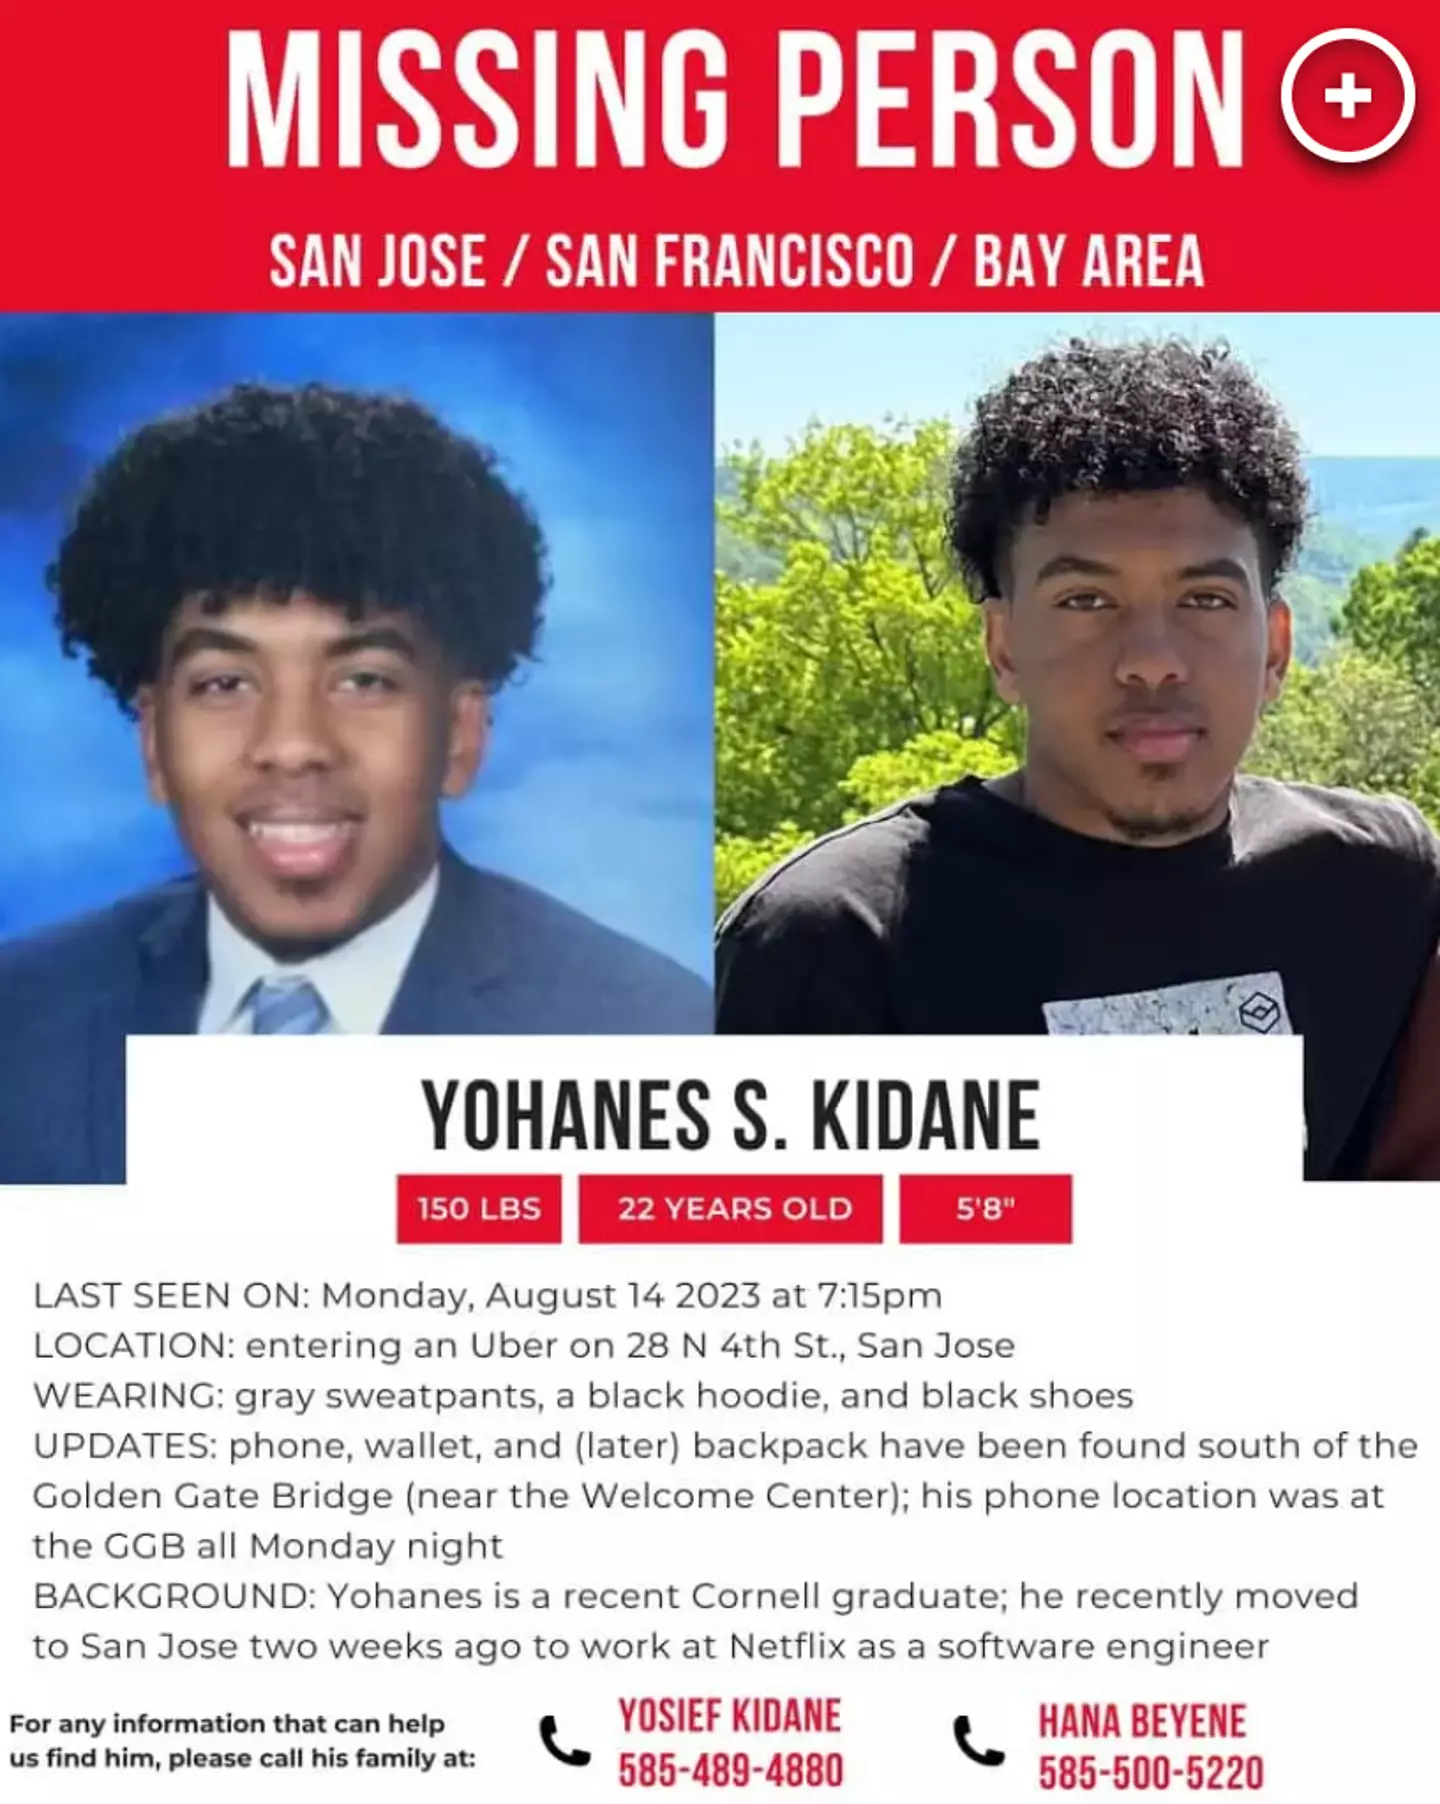 Yohanes Kidane's family have filed a missing person's report.